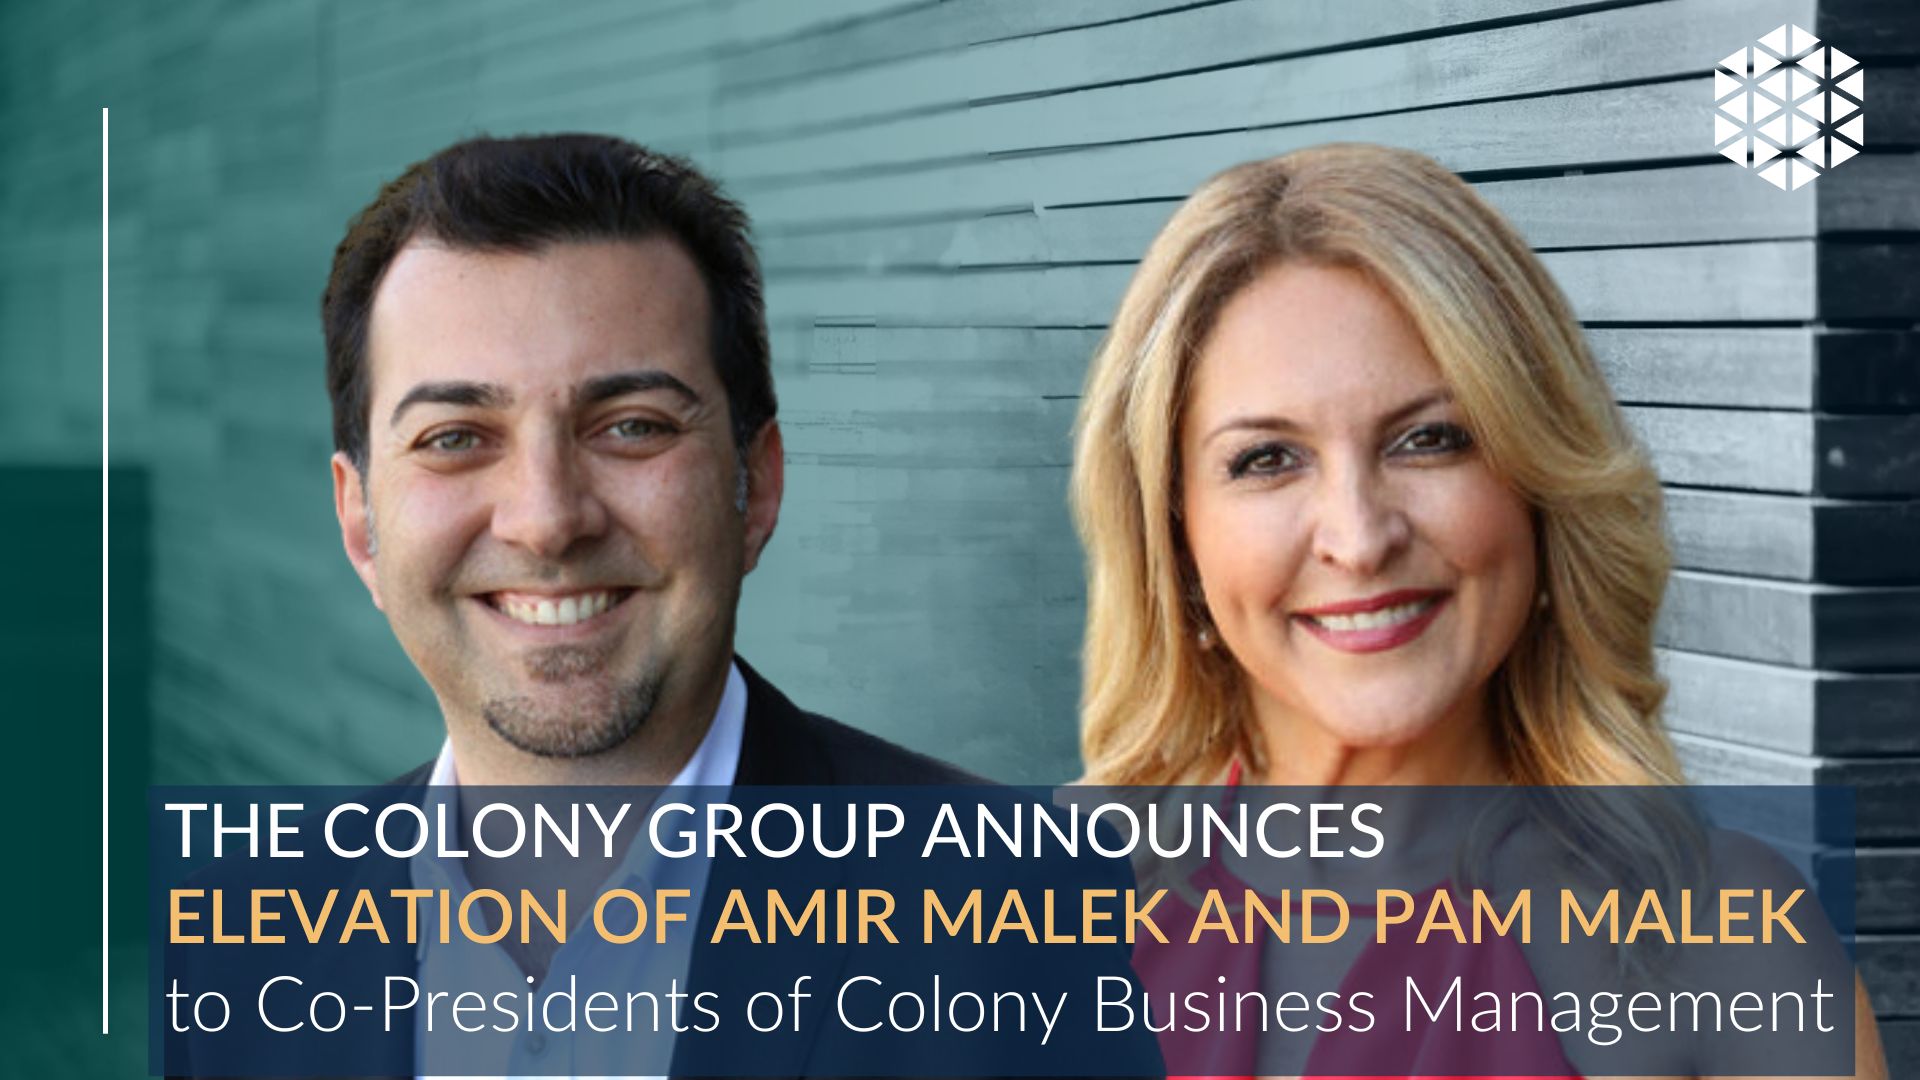 The Colony Group Announces Elevation of Amir Malek and Pam Malek to Co-Presidents of Colony Business Management